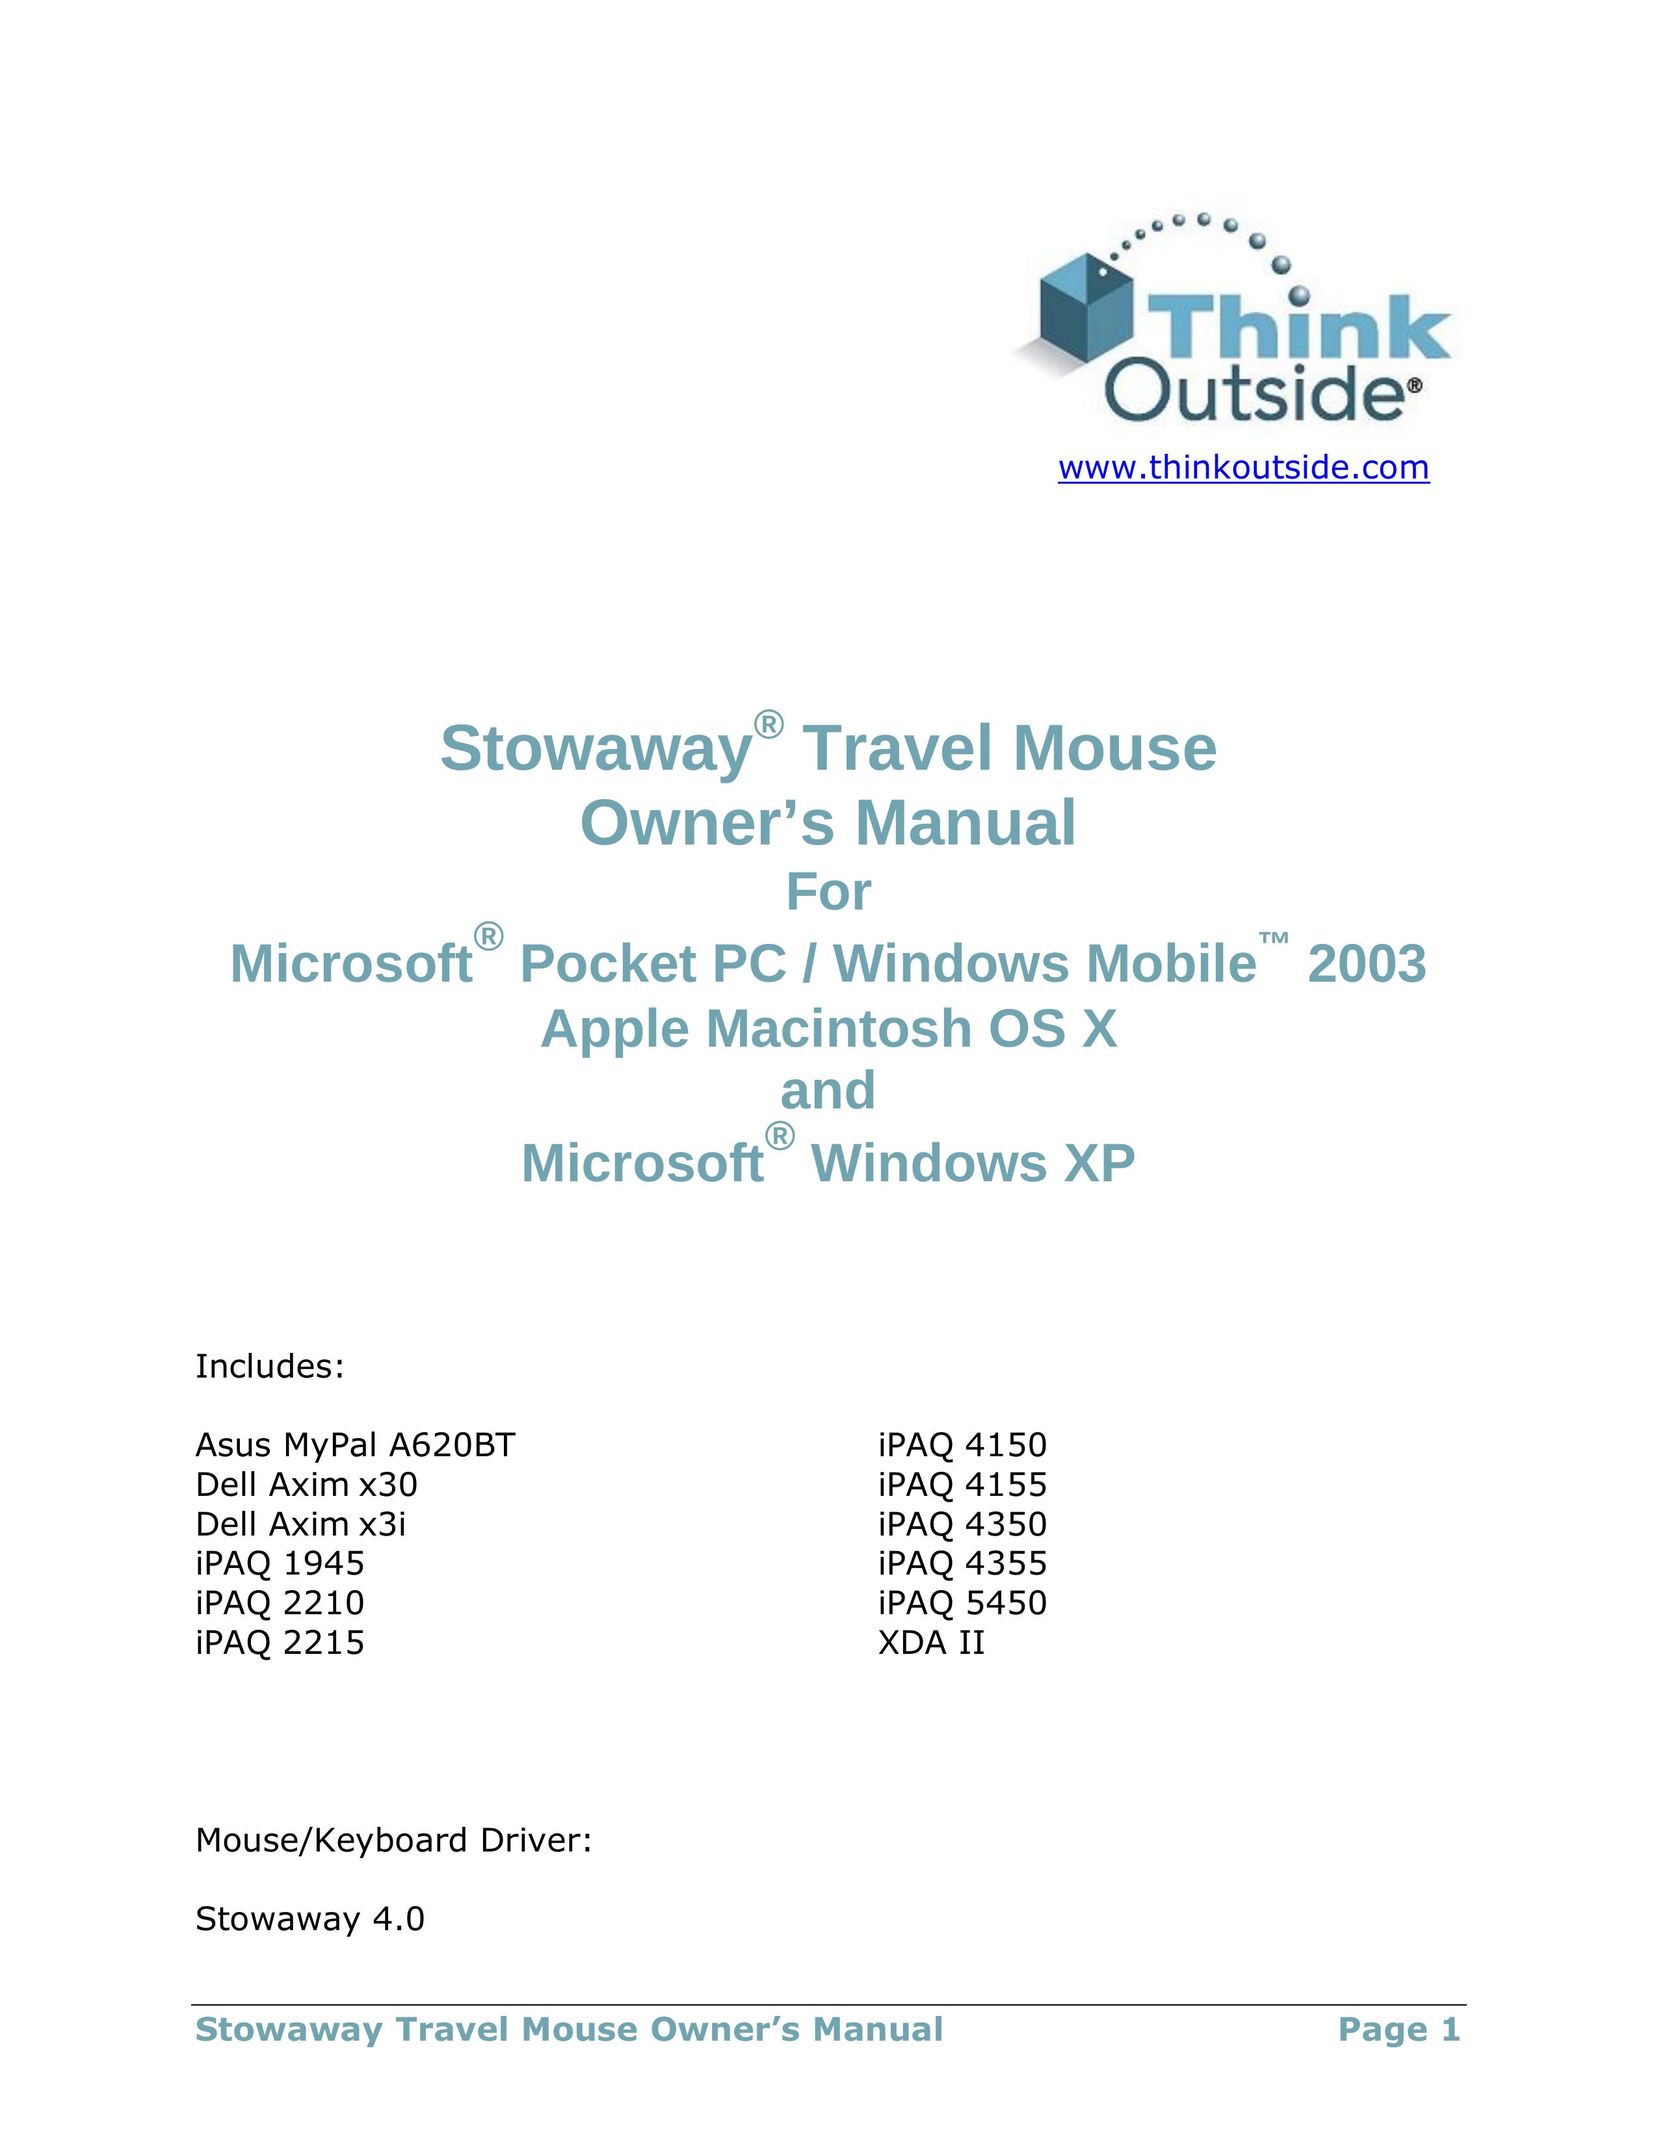 Think Outside Travel Mouse (for iPAQ 2210) PDAs & Smartphones User Manual